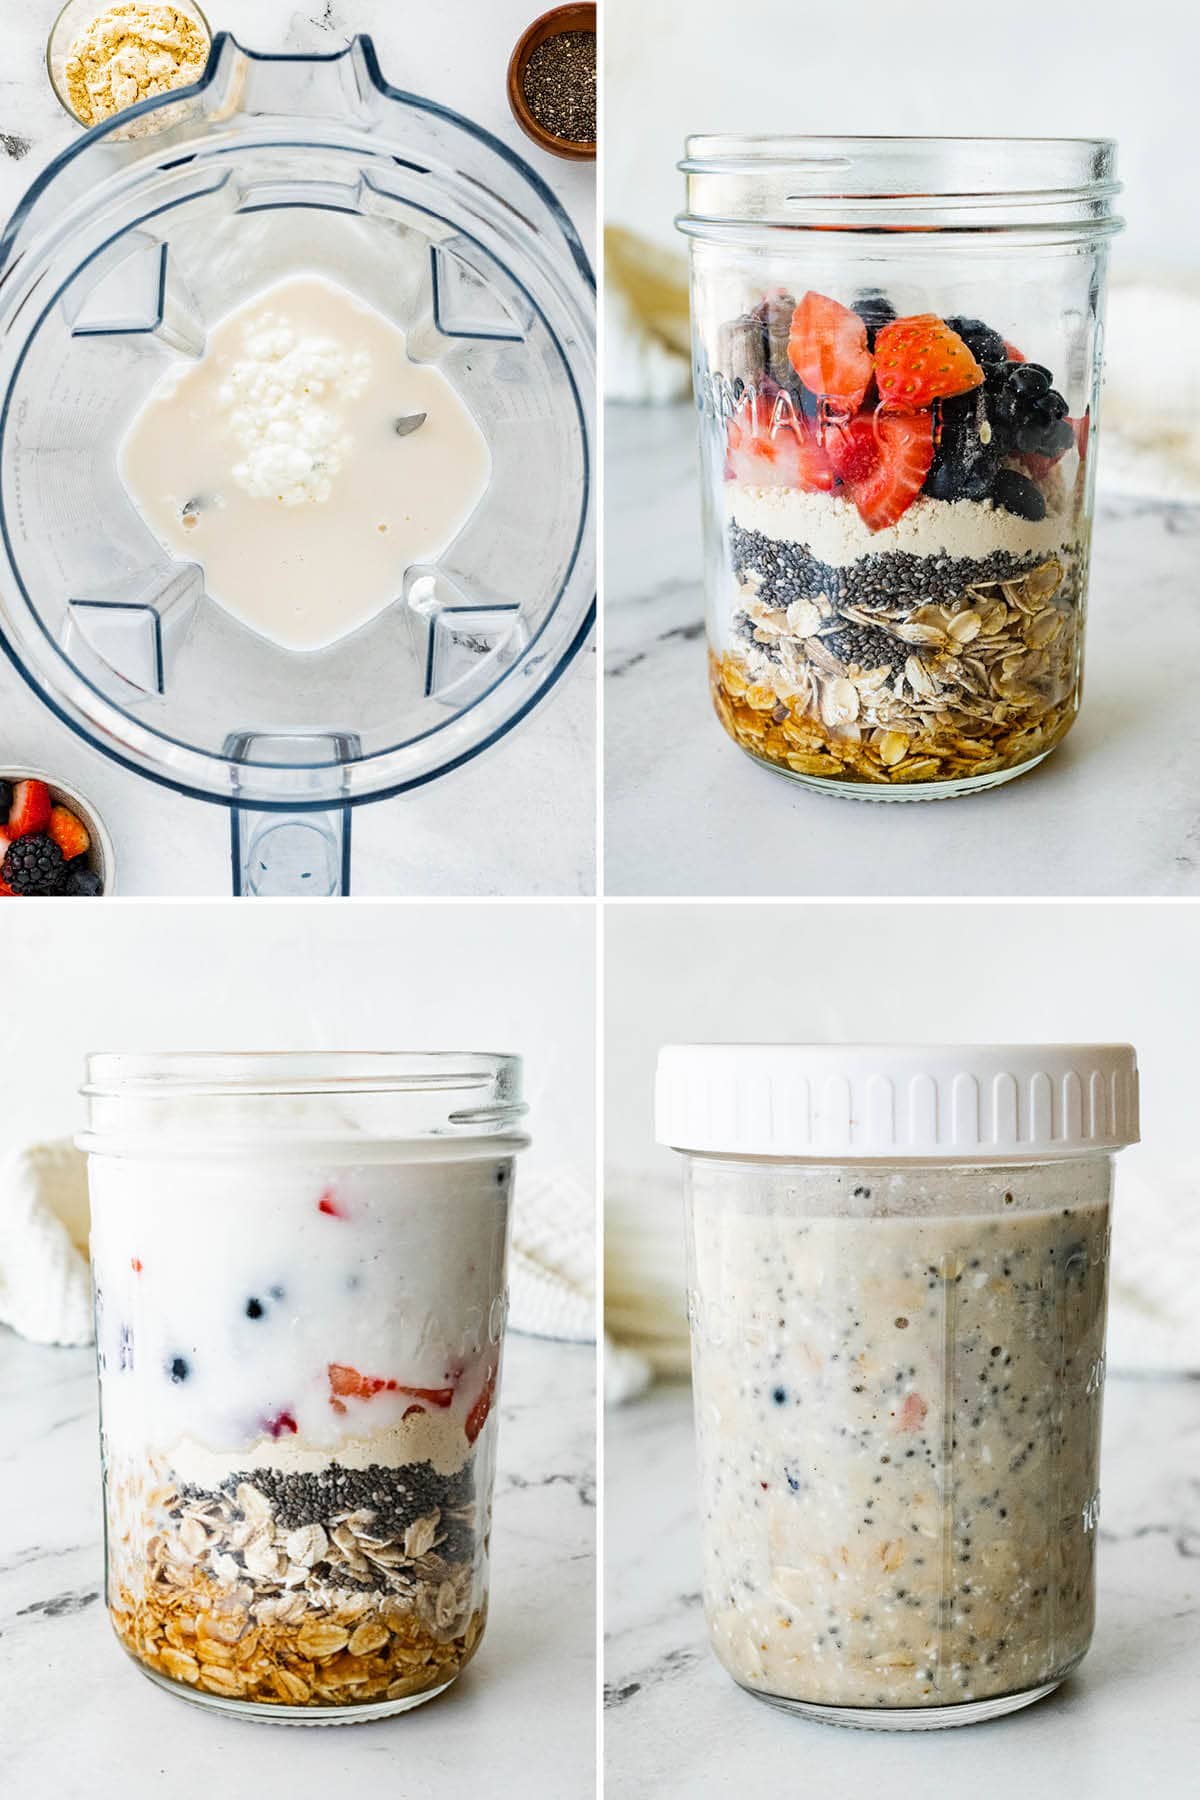 Collage of four photos showing how to make Cottage Cheese Overnight Oats: blending cottage cheese with almond milk, adding the mixture to a jar with oats, protein powder, berries and chia seeds, and then the oats setting in a jar.